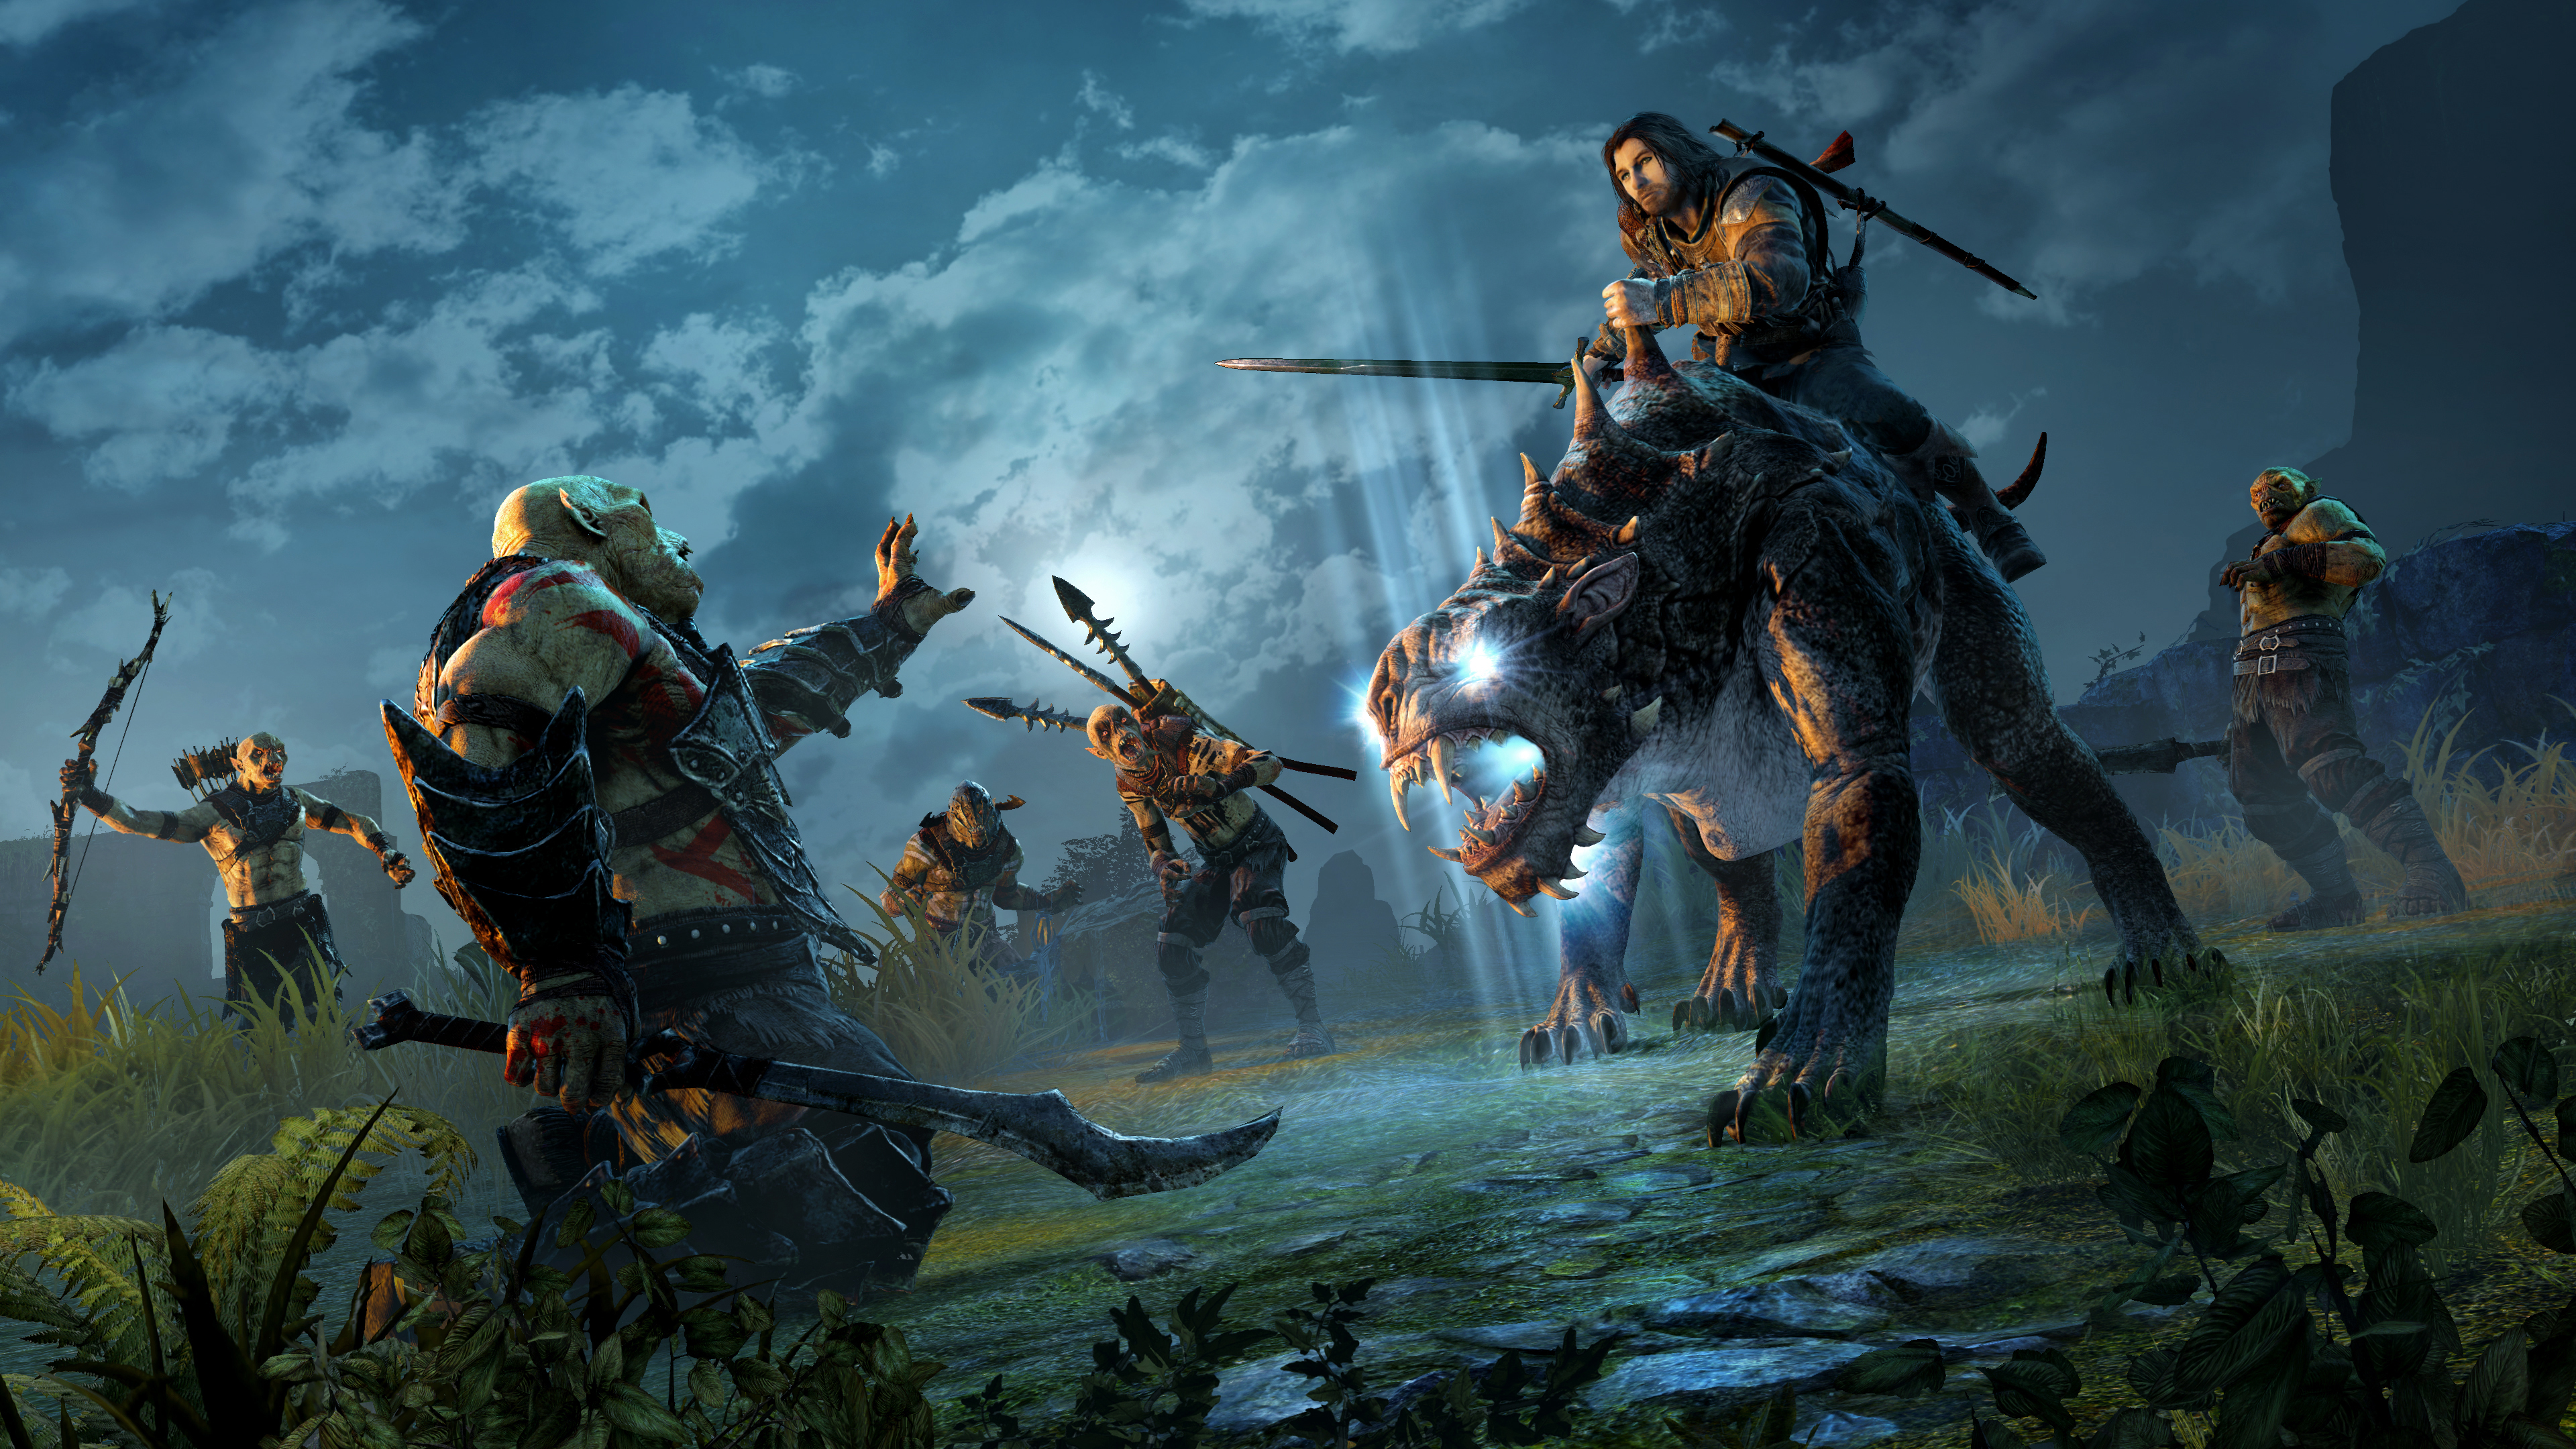 Video Game Middle-earth: Shadow of Mordor Wallpaper